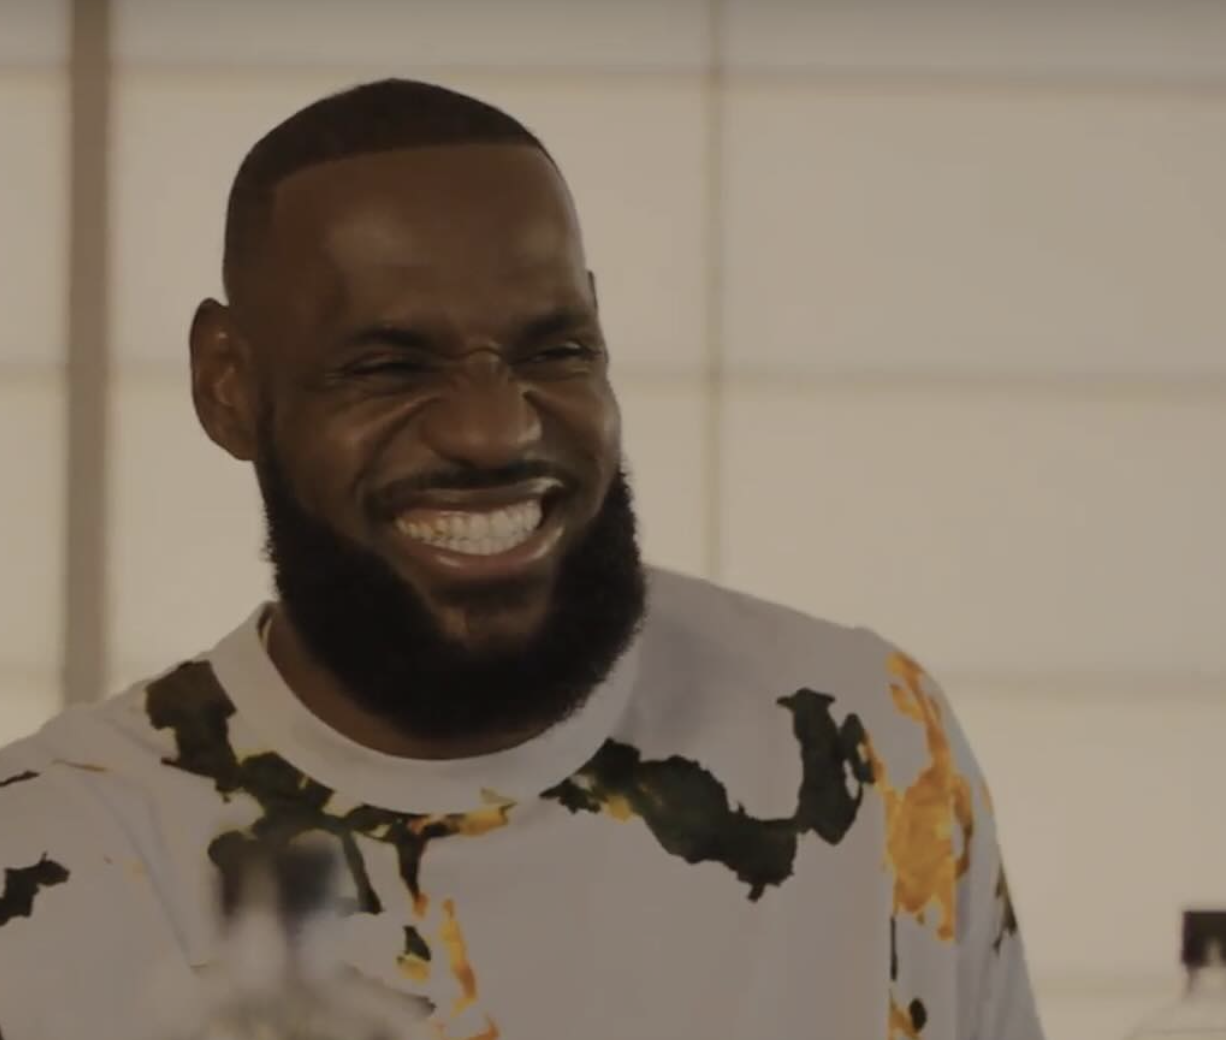 social-media-users-unhappy-with-lebron-james-not-sitting-down-during-american-national-anthem 